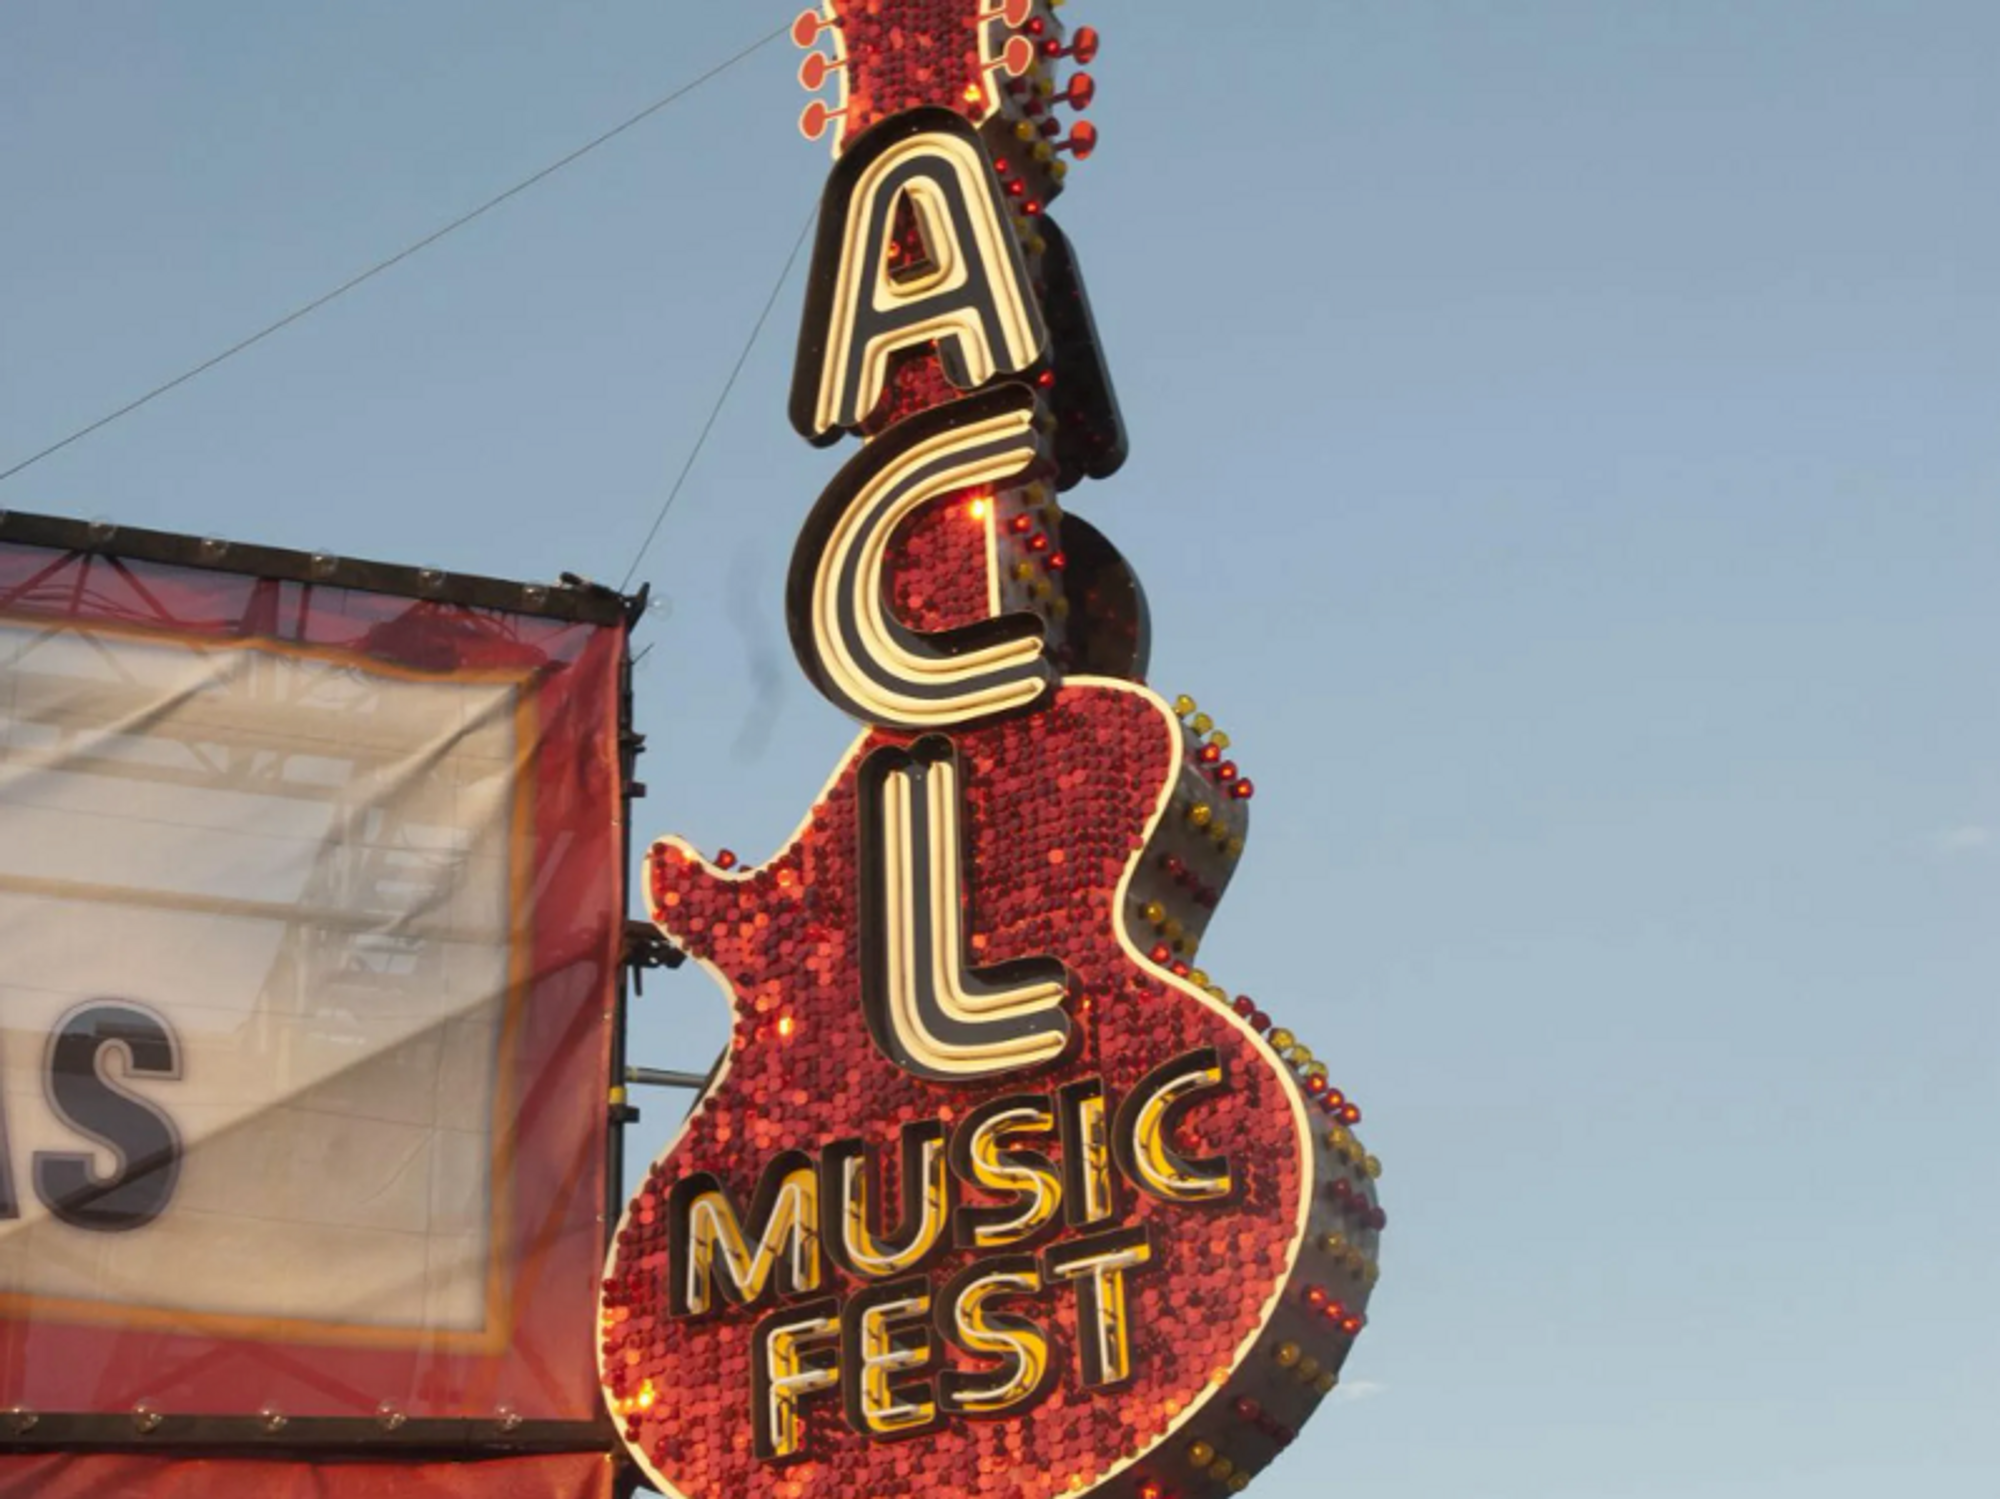 ACL Music Fest sign